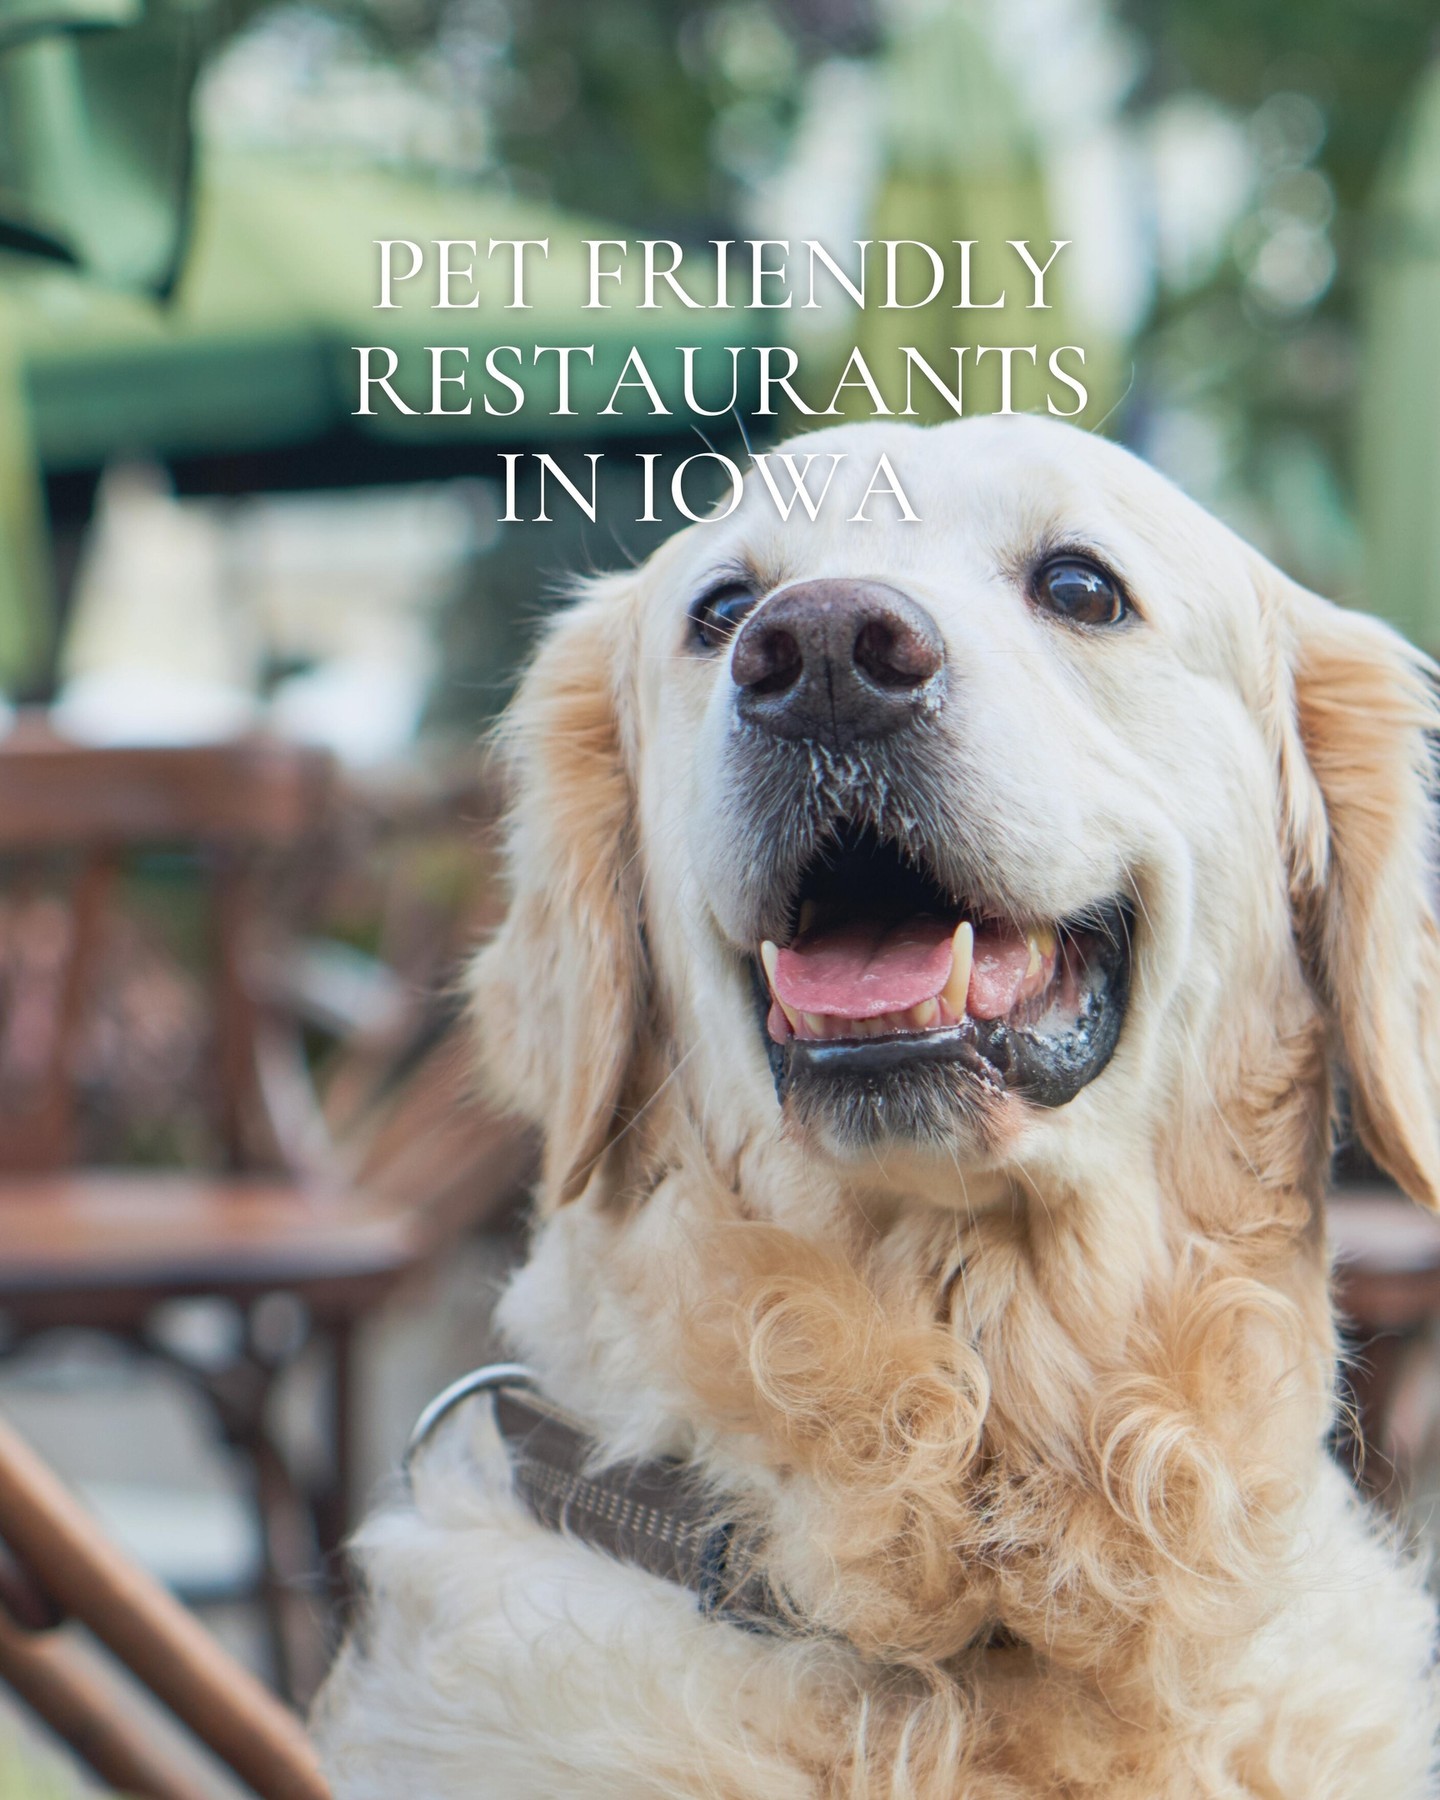 There’s arguably nothing better than getting to enjoy a good meal with those you love most—including your pet too, of course 🐾For your next restaurant outing, consider opting for a pet-friendly restaurant and letting your pup tag along with you at one of these Iowa eateries. To read the list, check out the link in our bio!